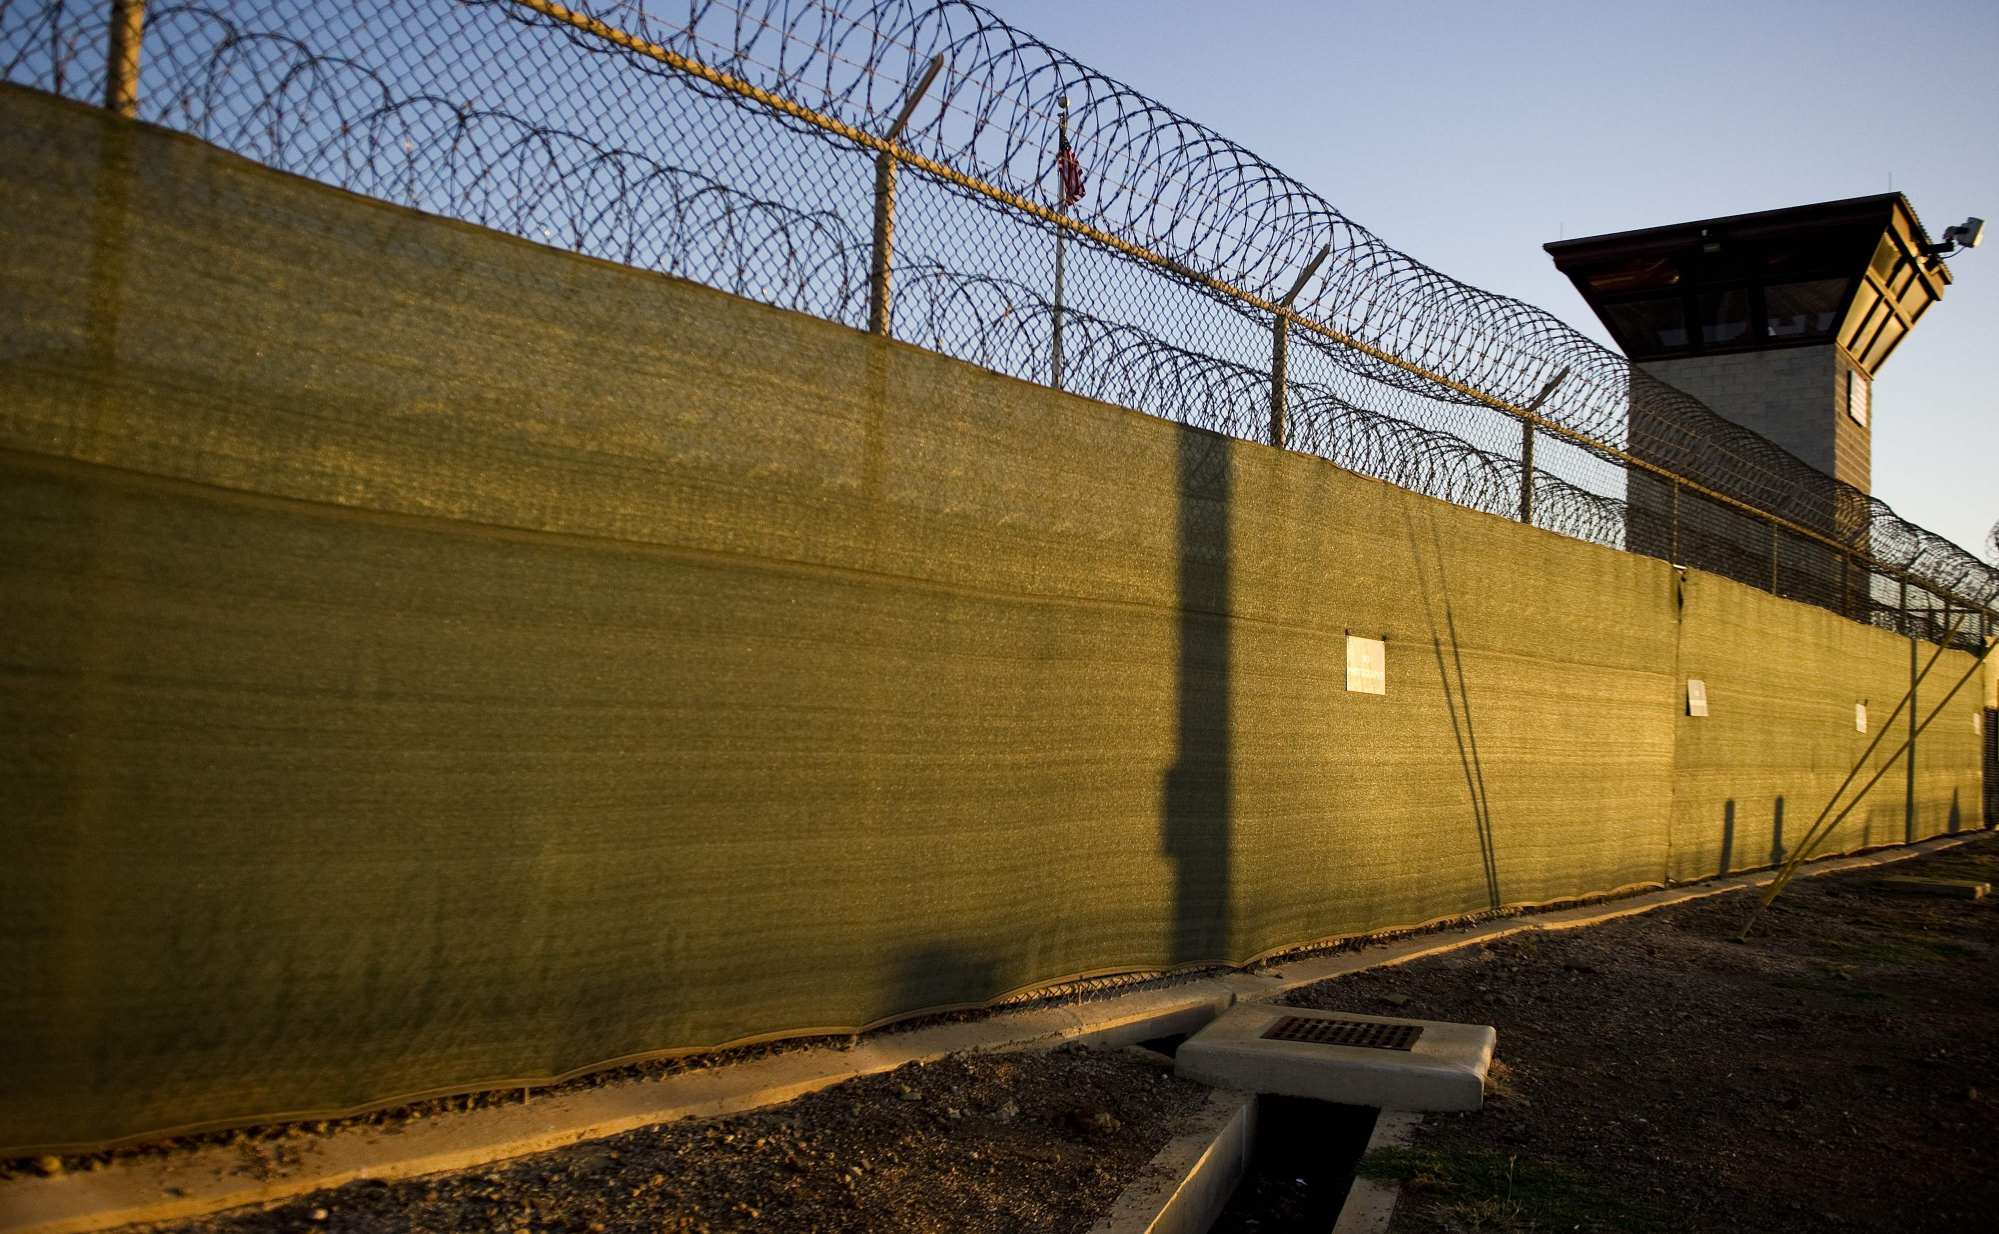 The guard tower of “Camp Six” detention facility at the US Naval Station in Guantanamo Bay, Cuba, in 2012. For years, the US held 22 Uygurs at Guantanamo Bay. Photo: AFP